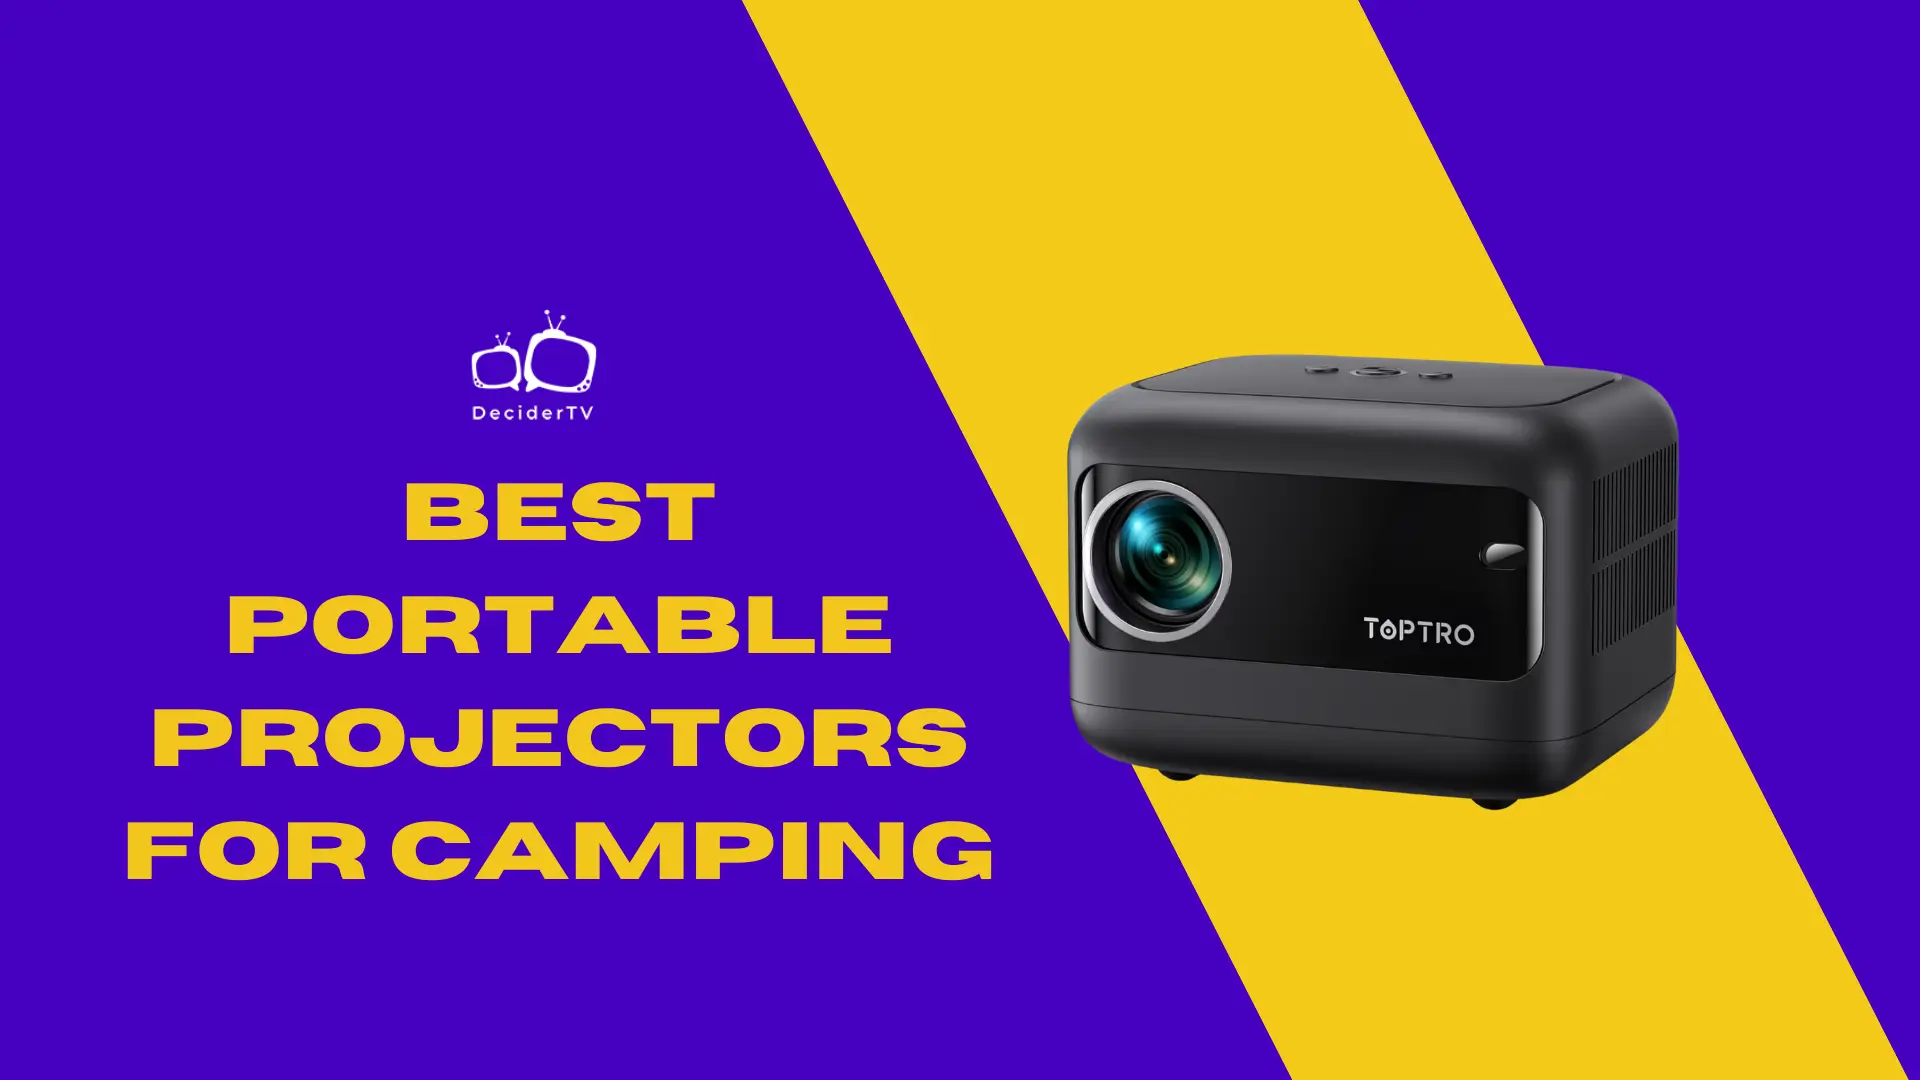 Best Portable Projectors for Camping